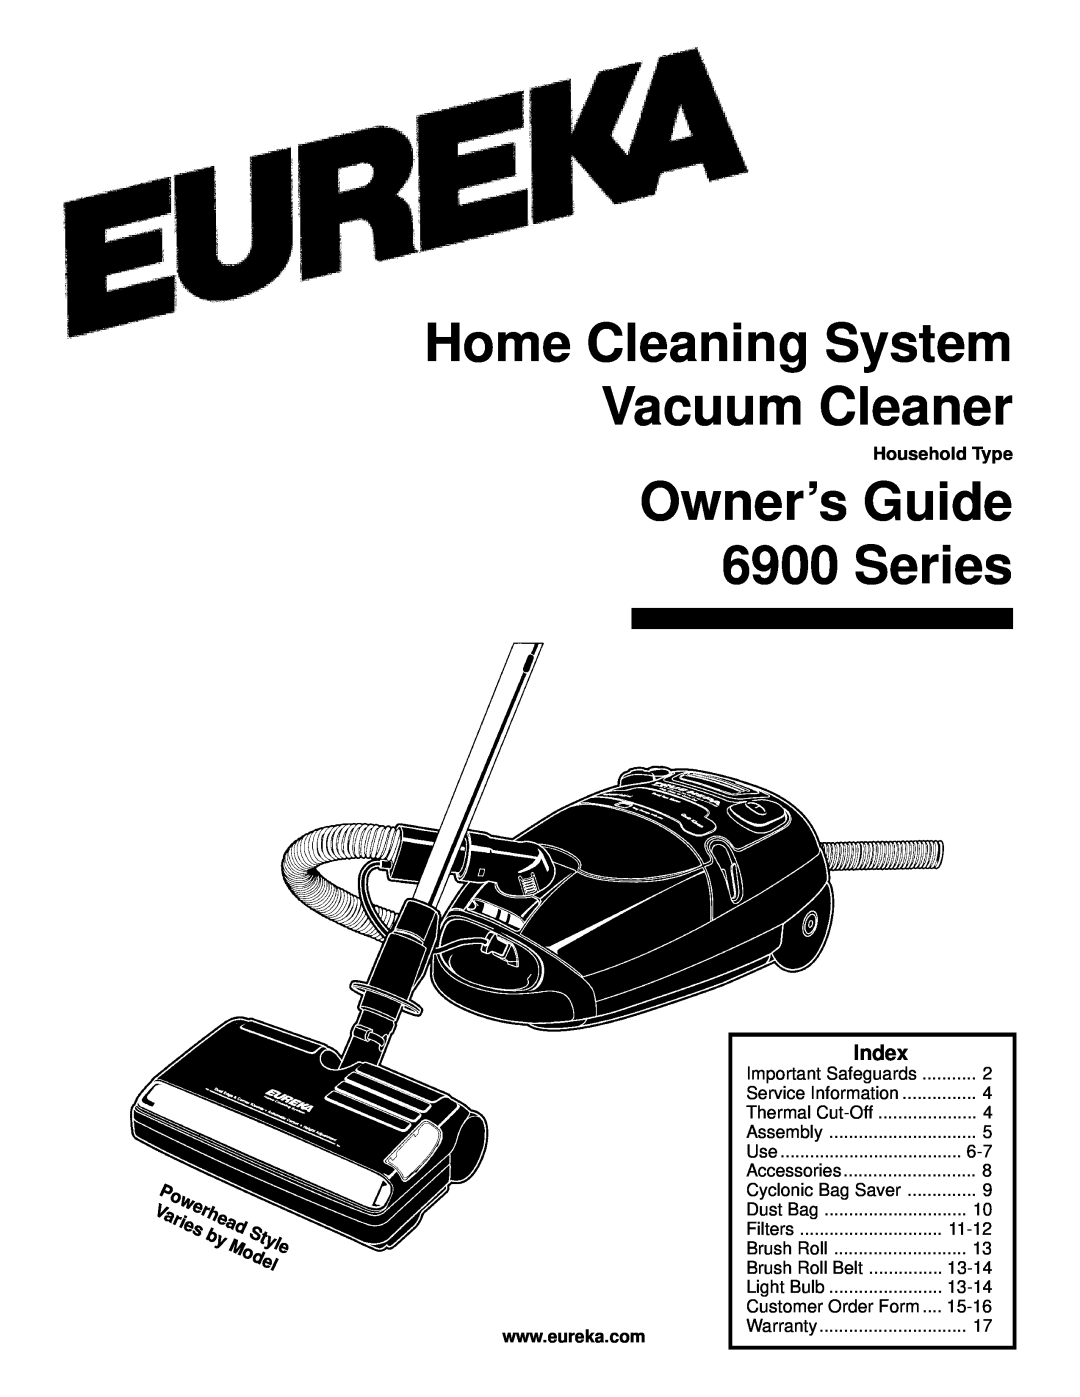 Eureka warranty Index, Household Type, Home Cleaning System Vacuum Cleaner, Owner’s Guide 6900 Series, Style, Model 